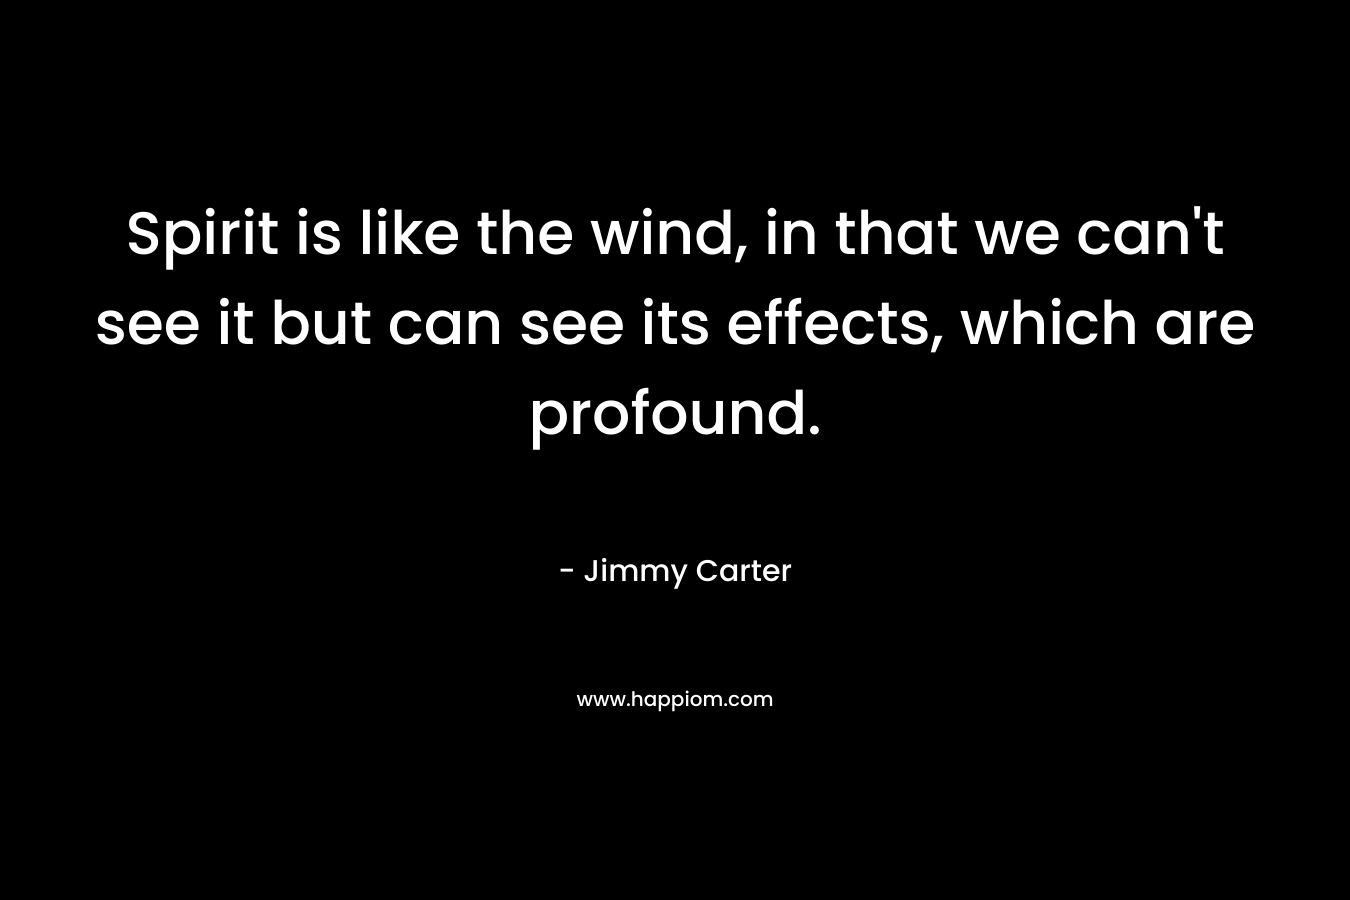 Spirit is like the wind, in that we can’t see it but can see its effects, which are profound. – Jimmy Carter